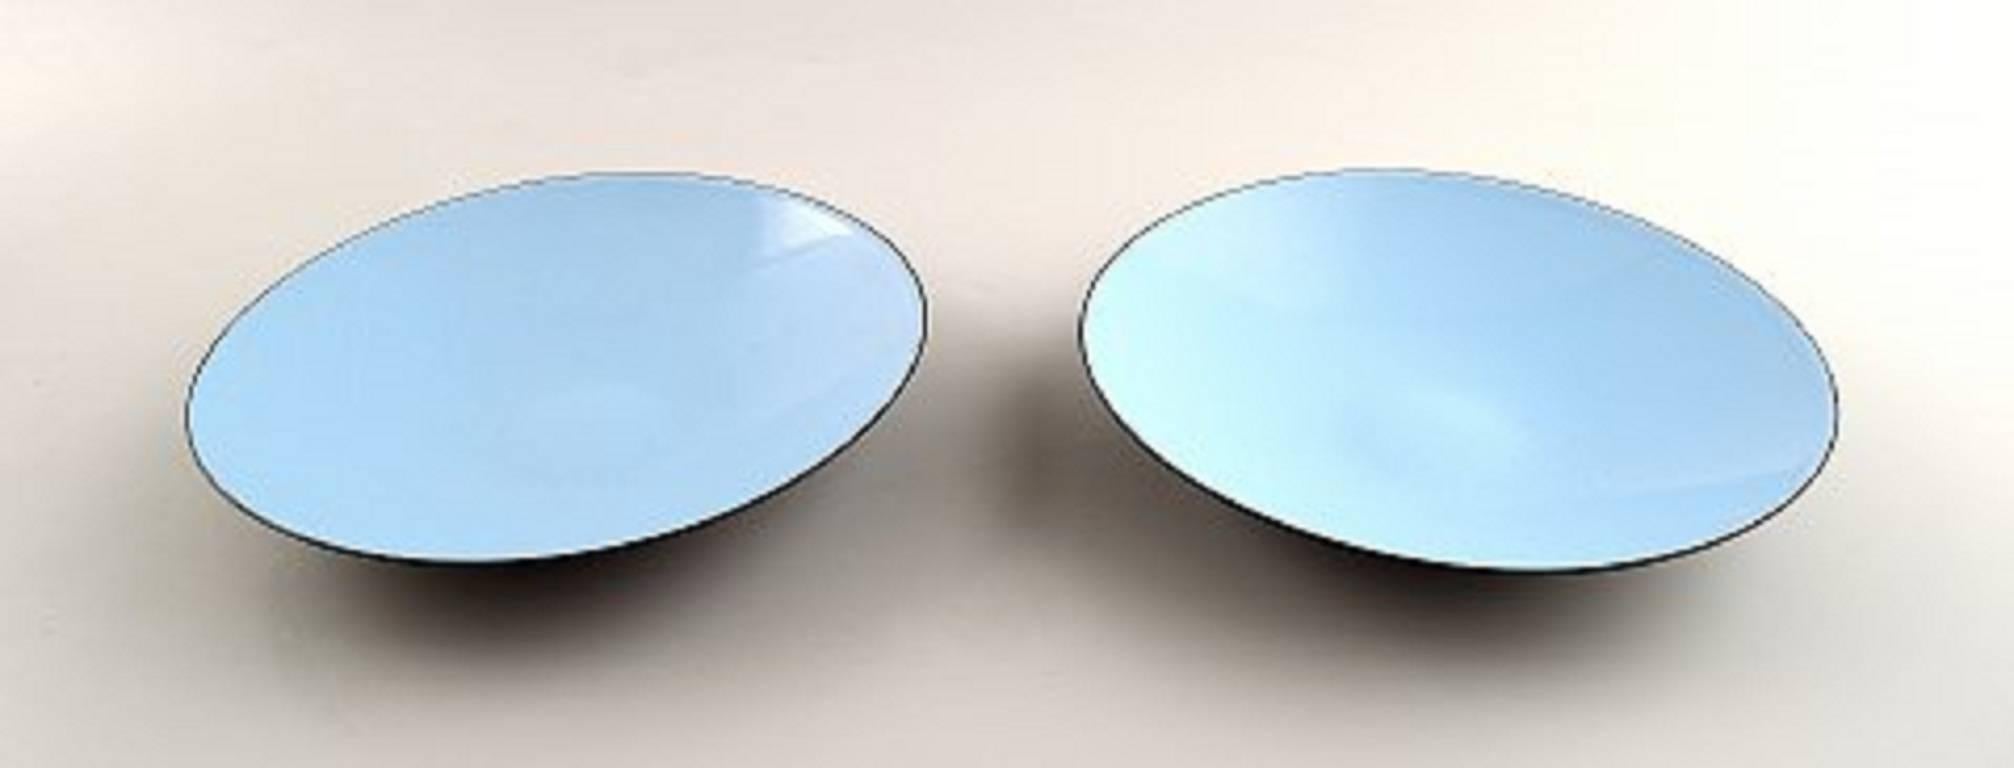 Late 20th Century Krenit 3 Bowls and Two Dishes by Herbert Krenchel, 1970s, Danish Design For Sale